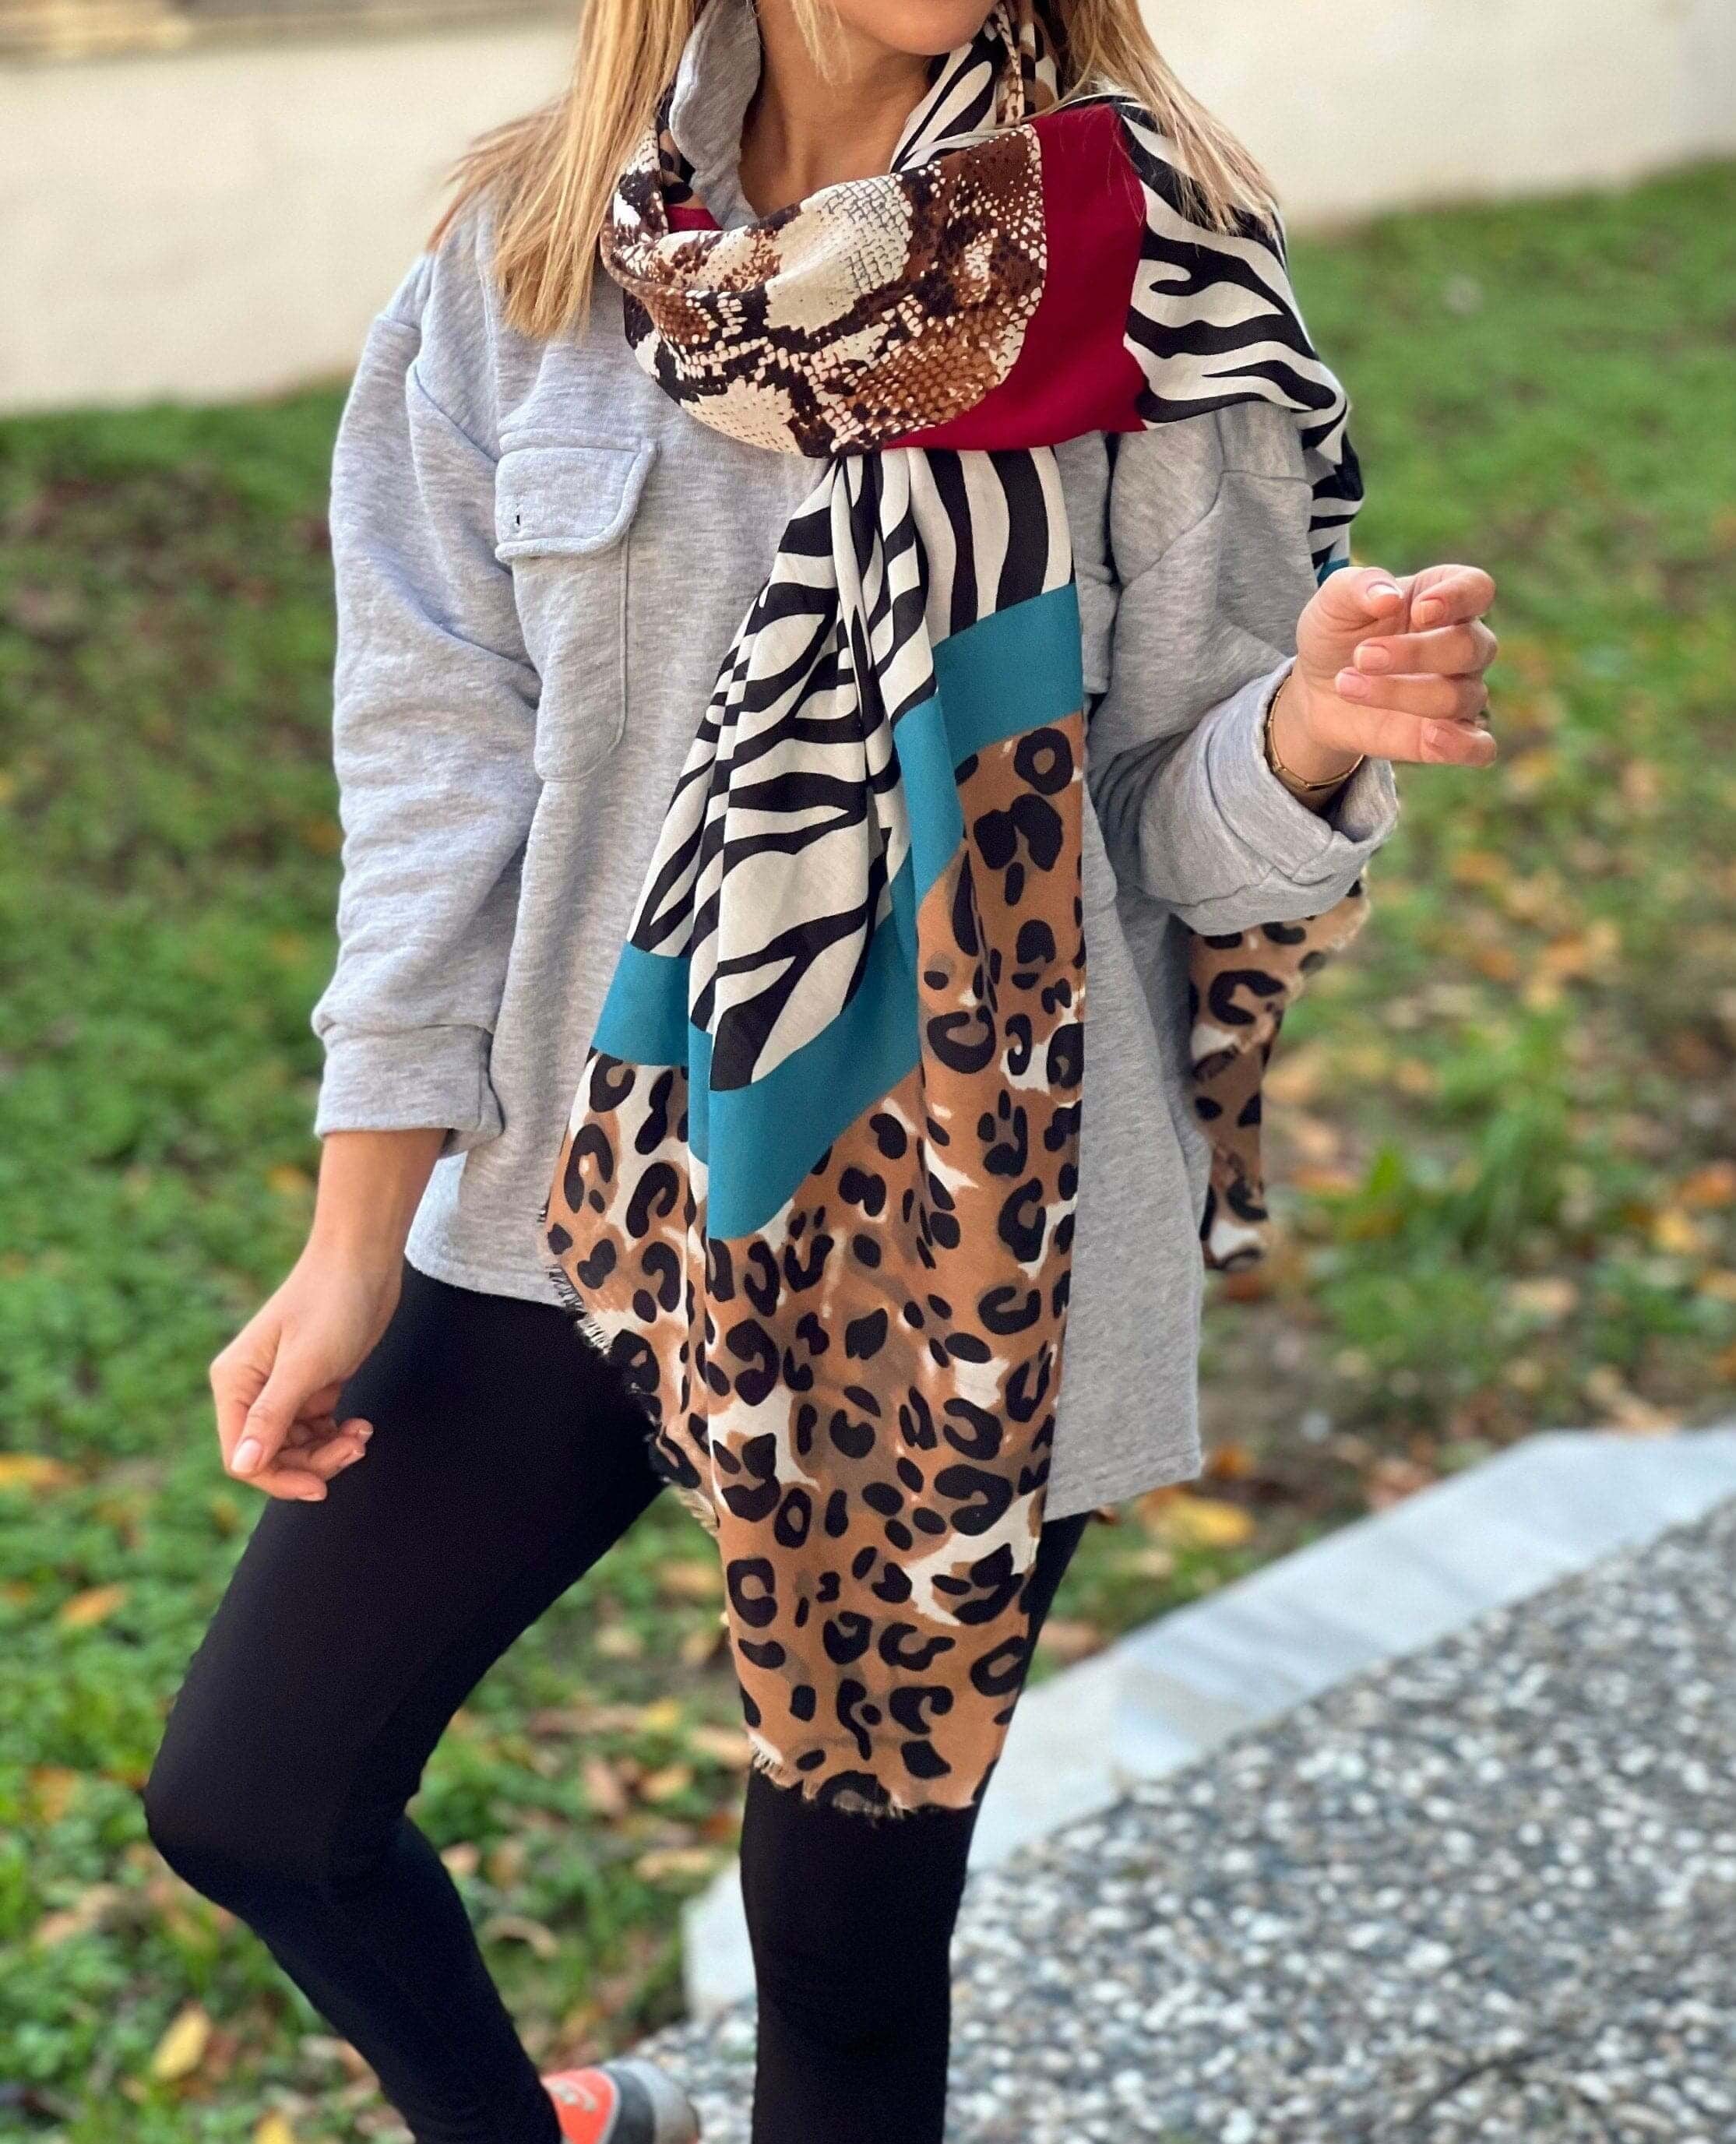 Looking for the perfect gift for the special woman in your life? Look no further than this beautiful cotton scarf! With its soft, lightweight fabric and animal print pattern, it&#39;s sure to be a hit.